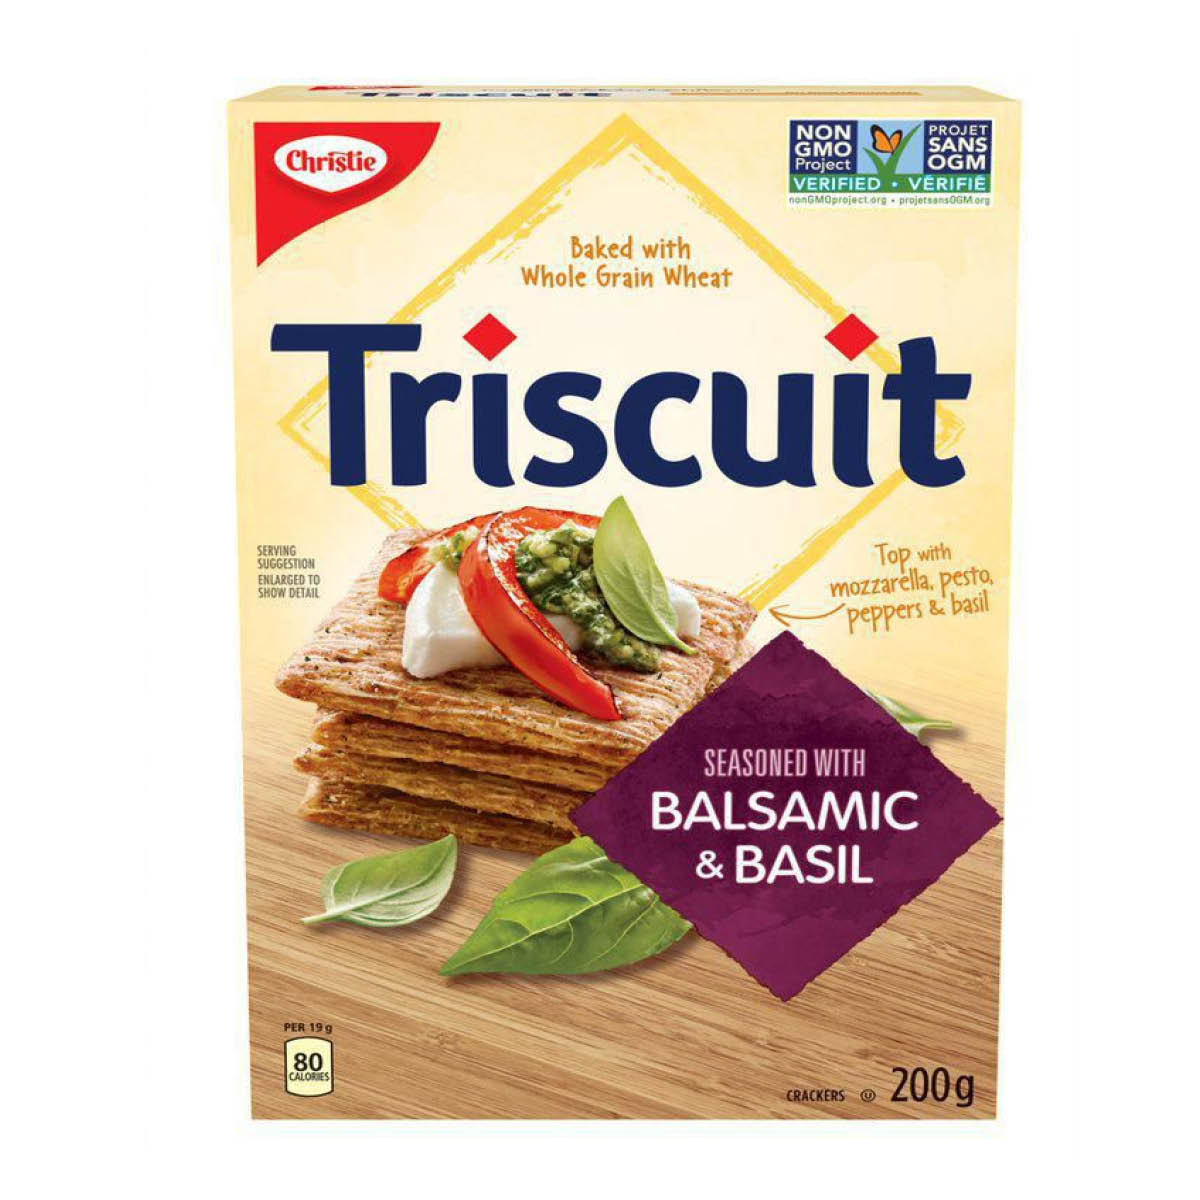 Christie Crackers Triscuit Balsamic & Basil, 200g